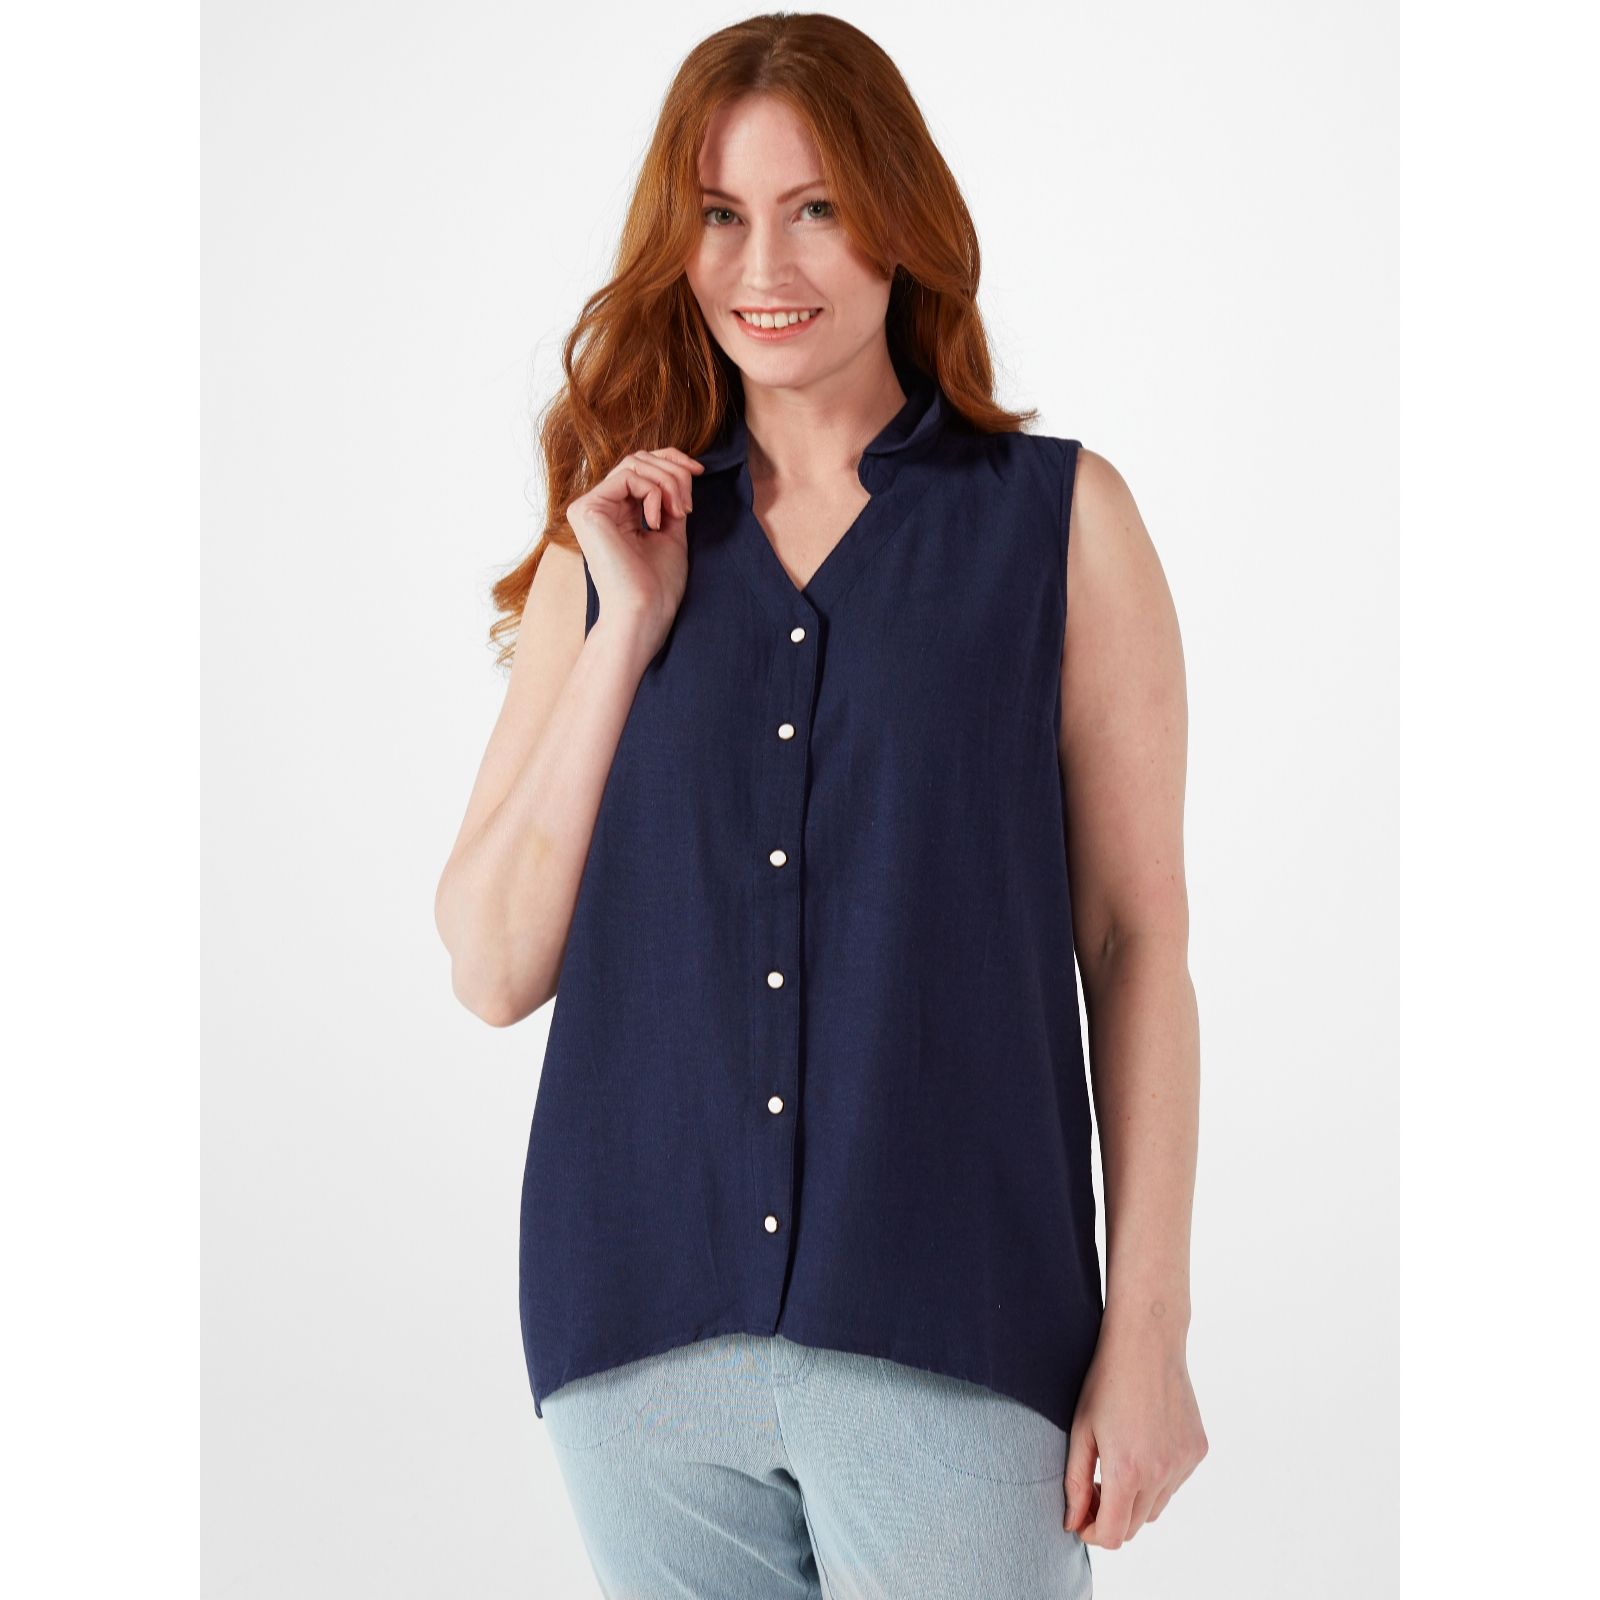 Denim & Co. Shirt With Detailed Buttons - QVC UK